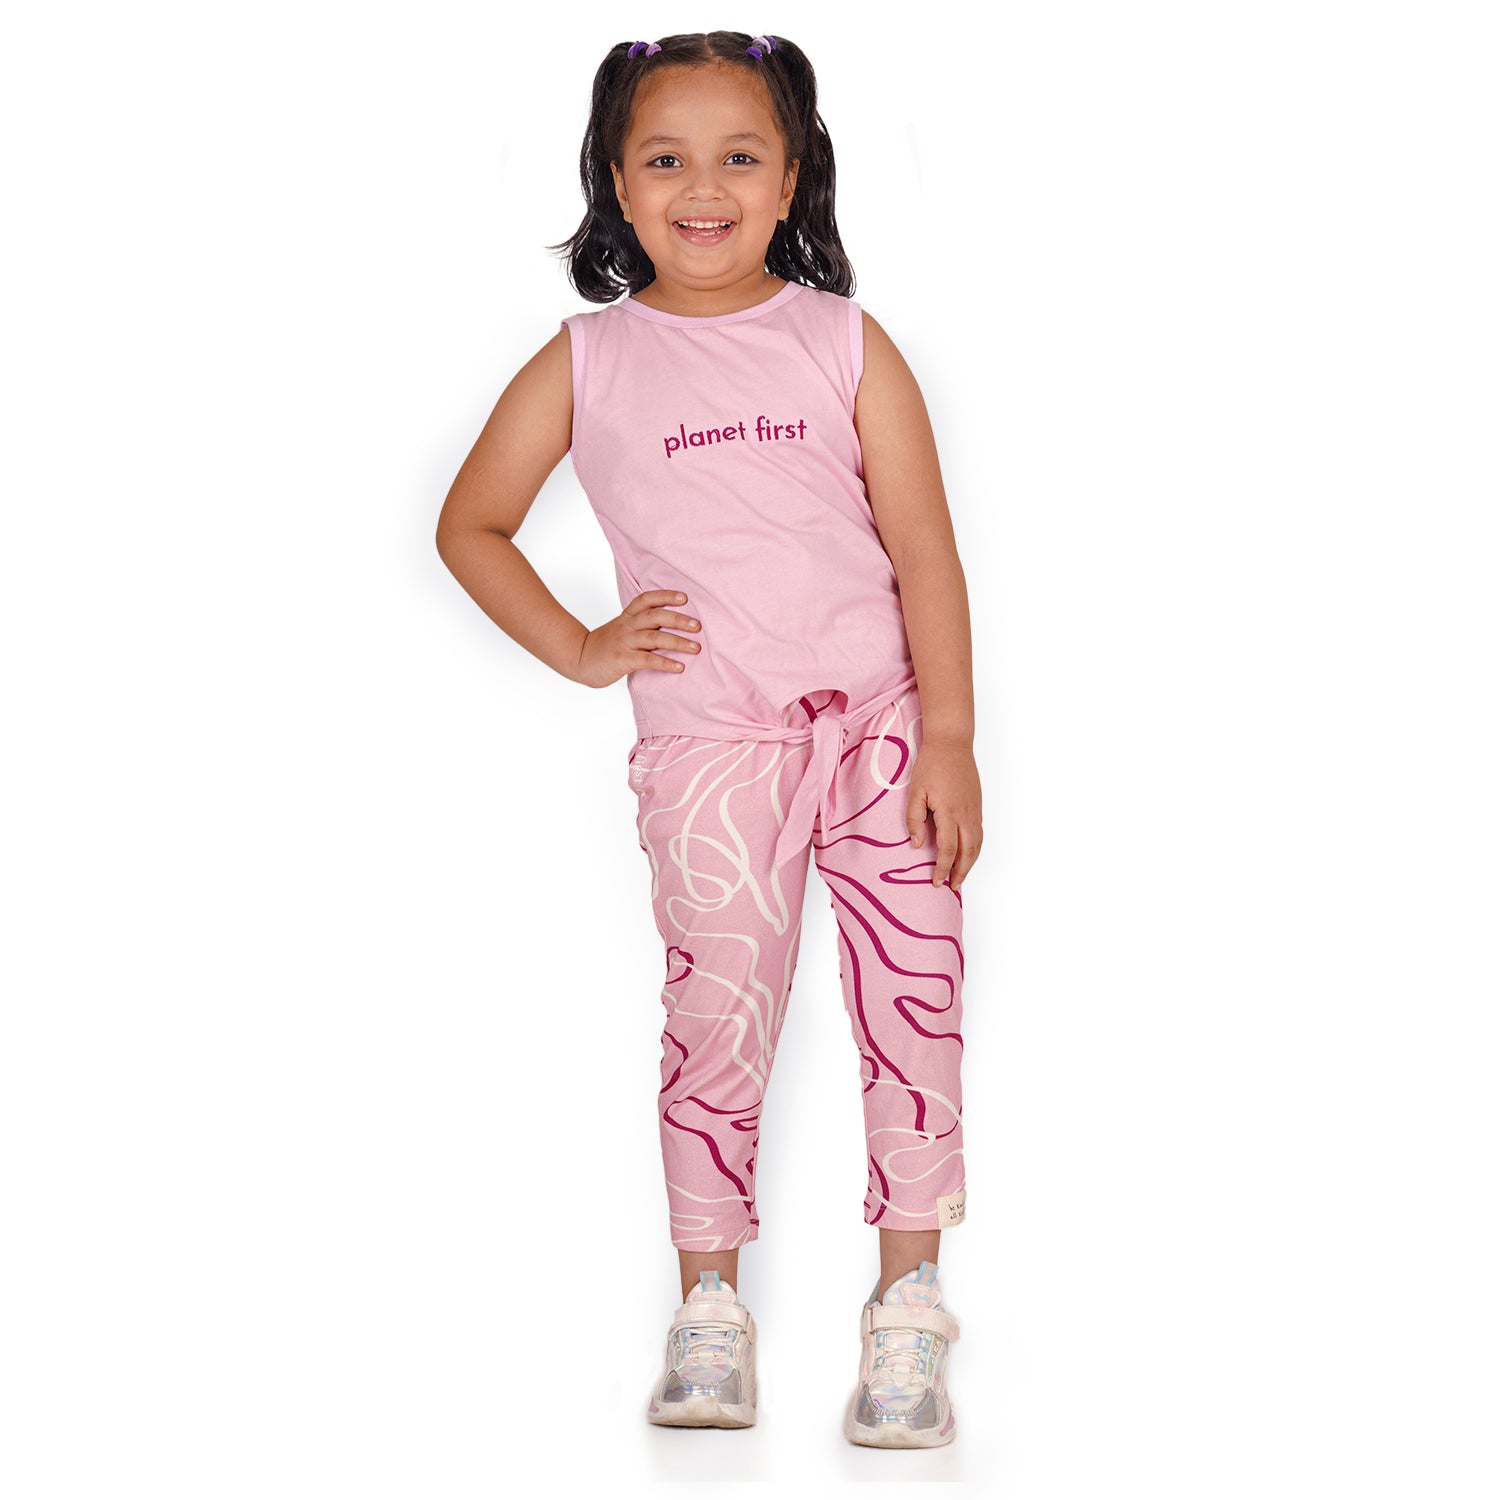 Planet First Slogan Vest with Matching Reef Printed Leggings Set, Pink